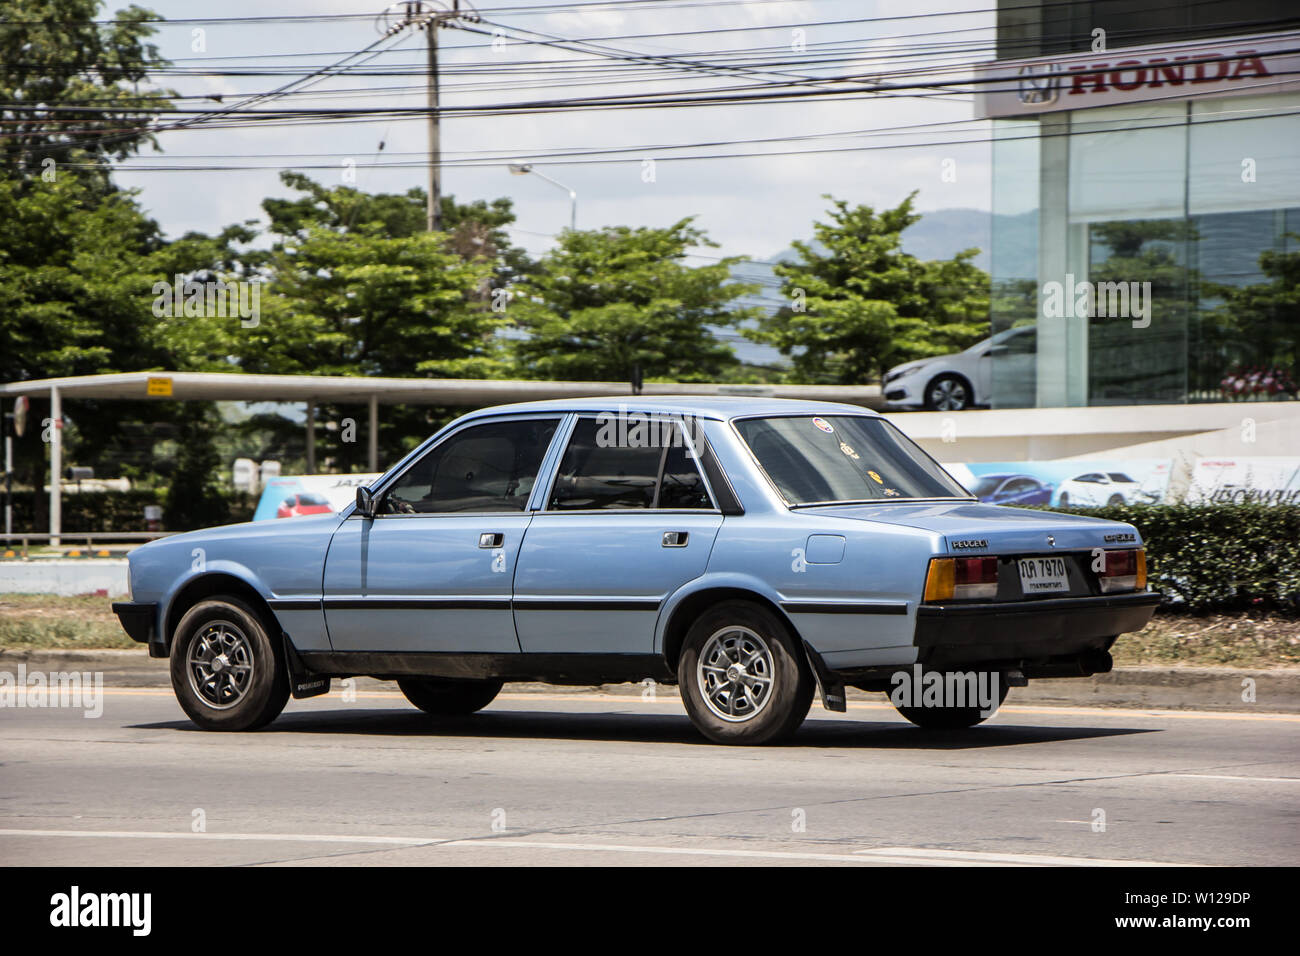 Chiangmai, Thailand - June 21 2019: Private Old Car, Peugeot 505 GR. Photo at road no.121 about 8 km from downtown Chiangmai, thailand. Stock Photo